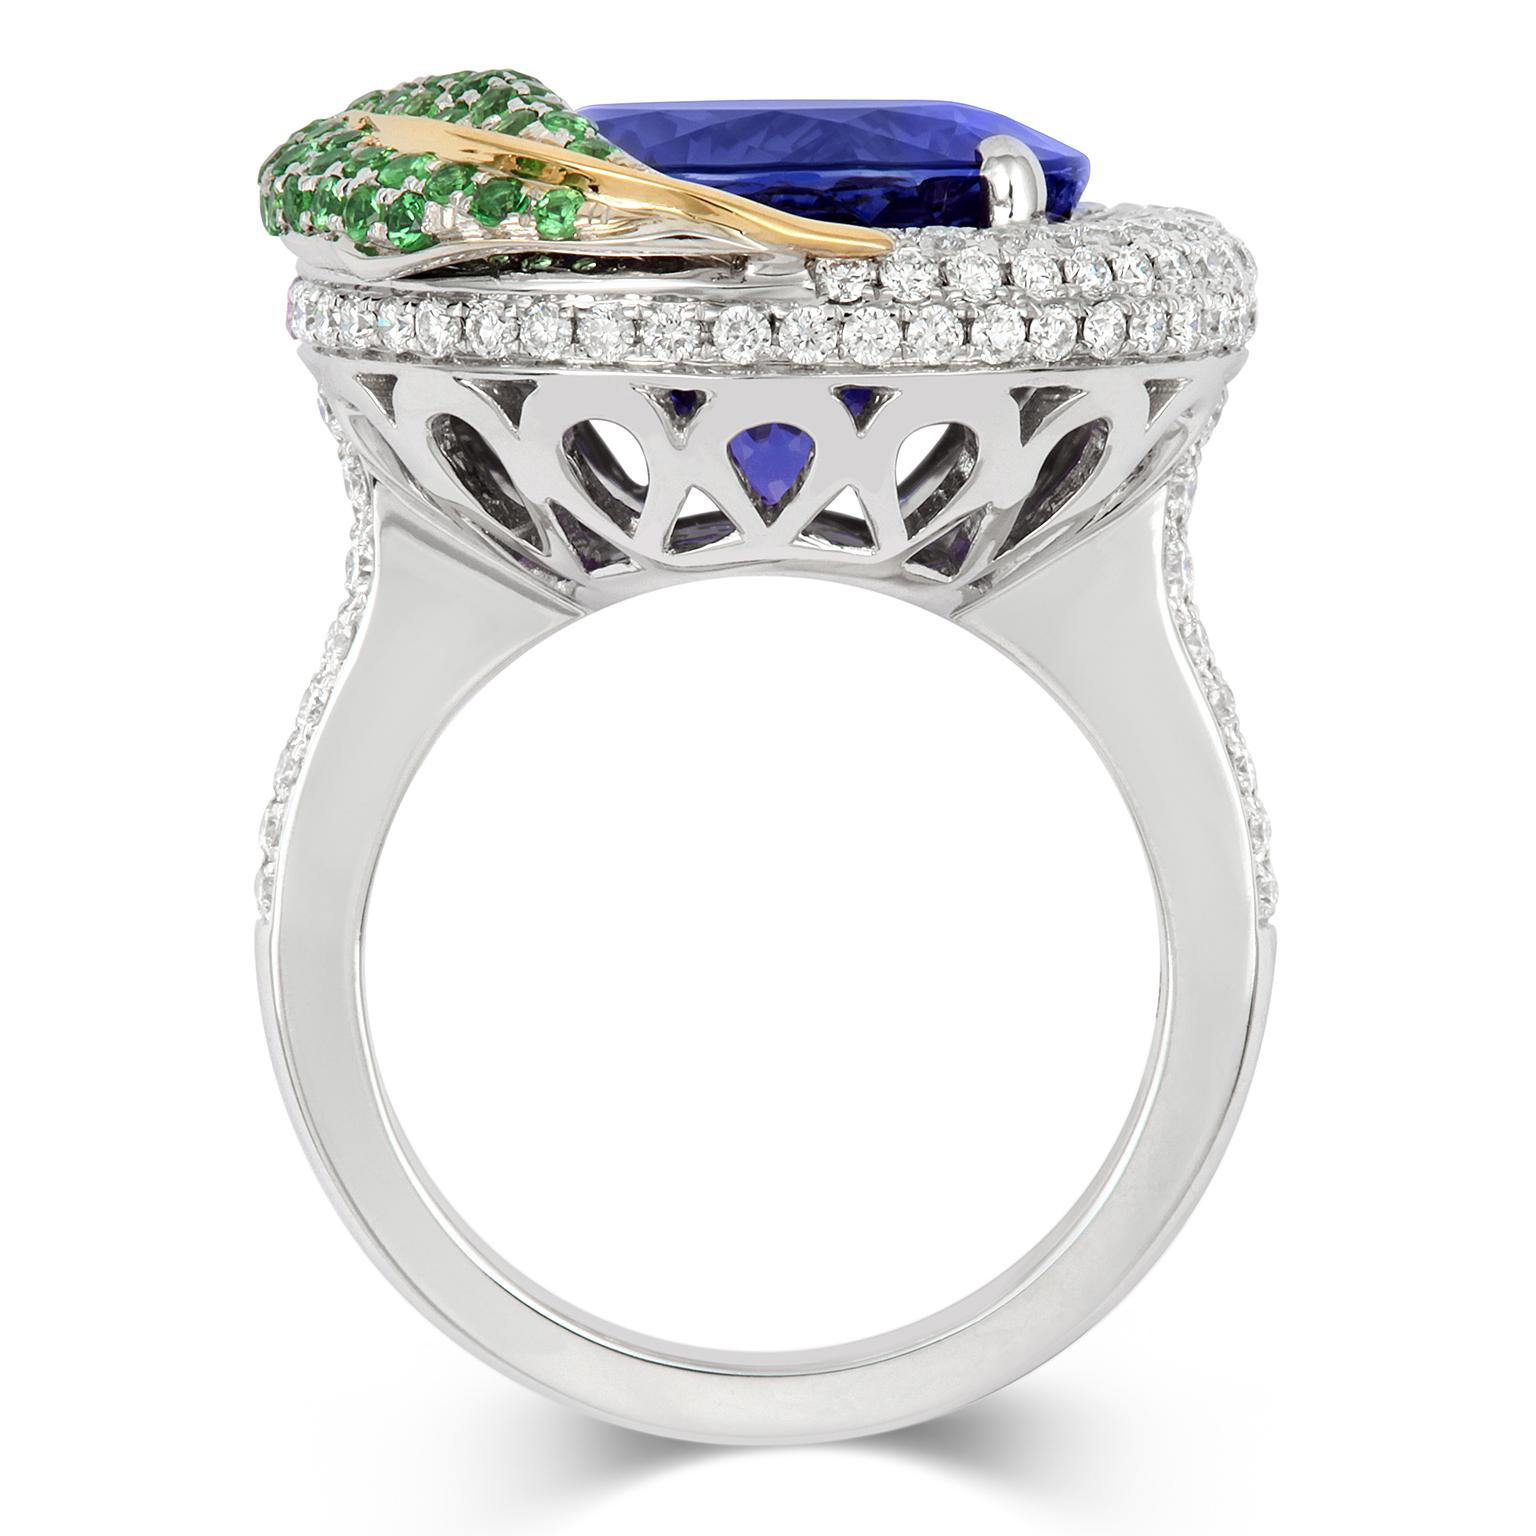 'THE RING OF PLENTY' - This stunning cocktail ring has been crafted in 18ct white & yellow gold and set with 1.22ct of glittering fine white diamonds, purple Sapphires, Tsavorite garnets and a vivid royal violet-blue AAAA 11.07ct Tanzanite. Inspired